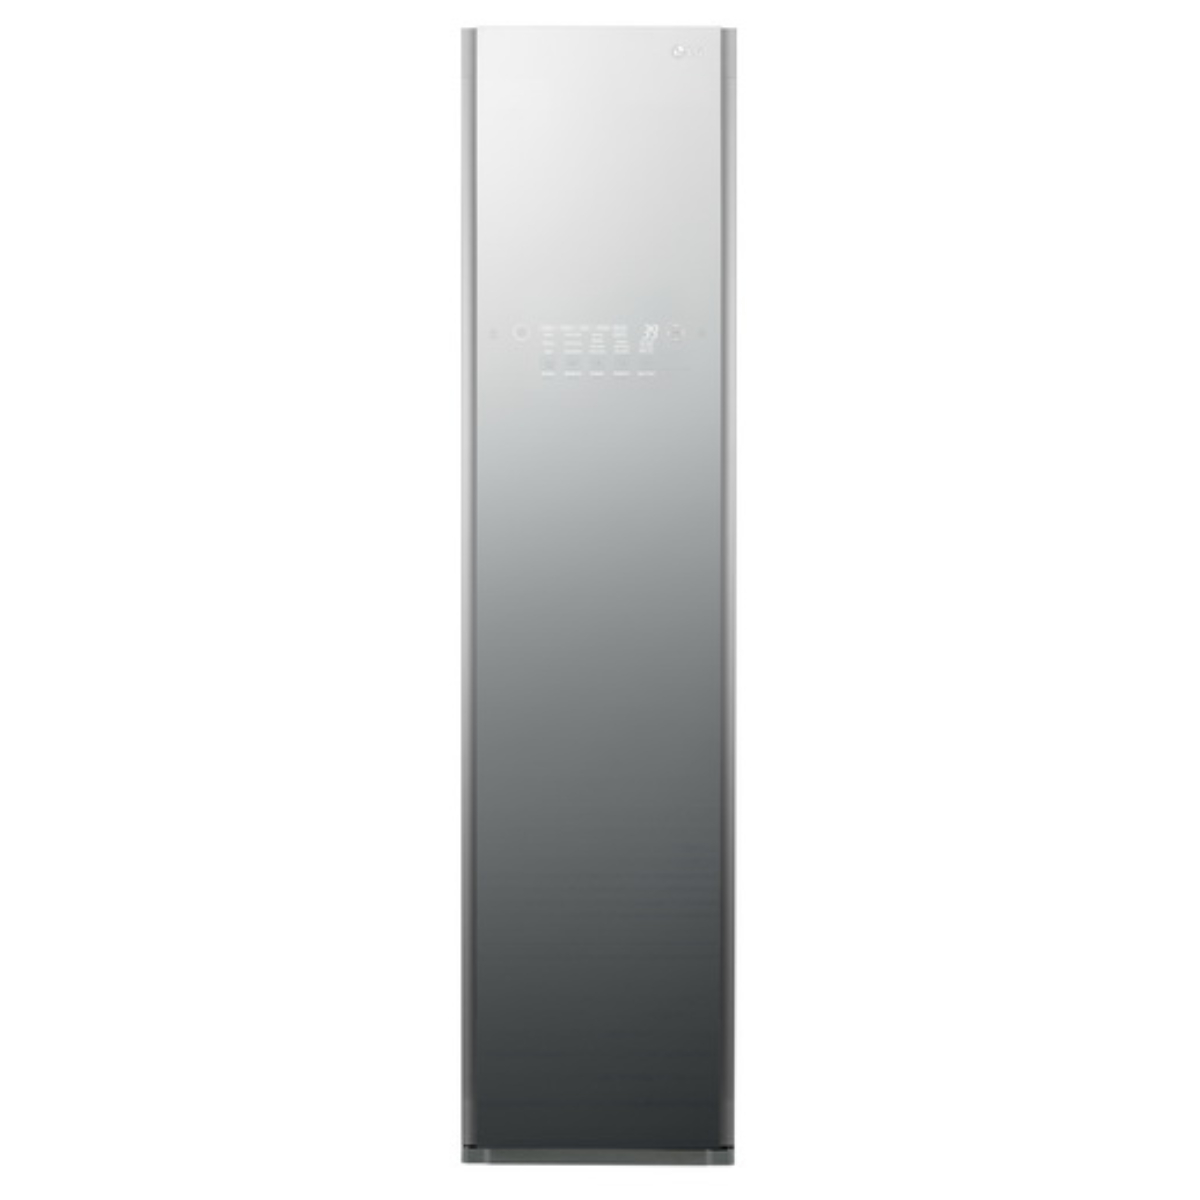 The Life Changing LG Styler Cleans Up - Kerrie Kelly